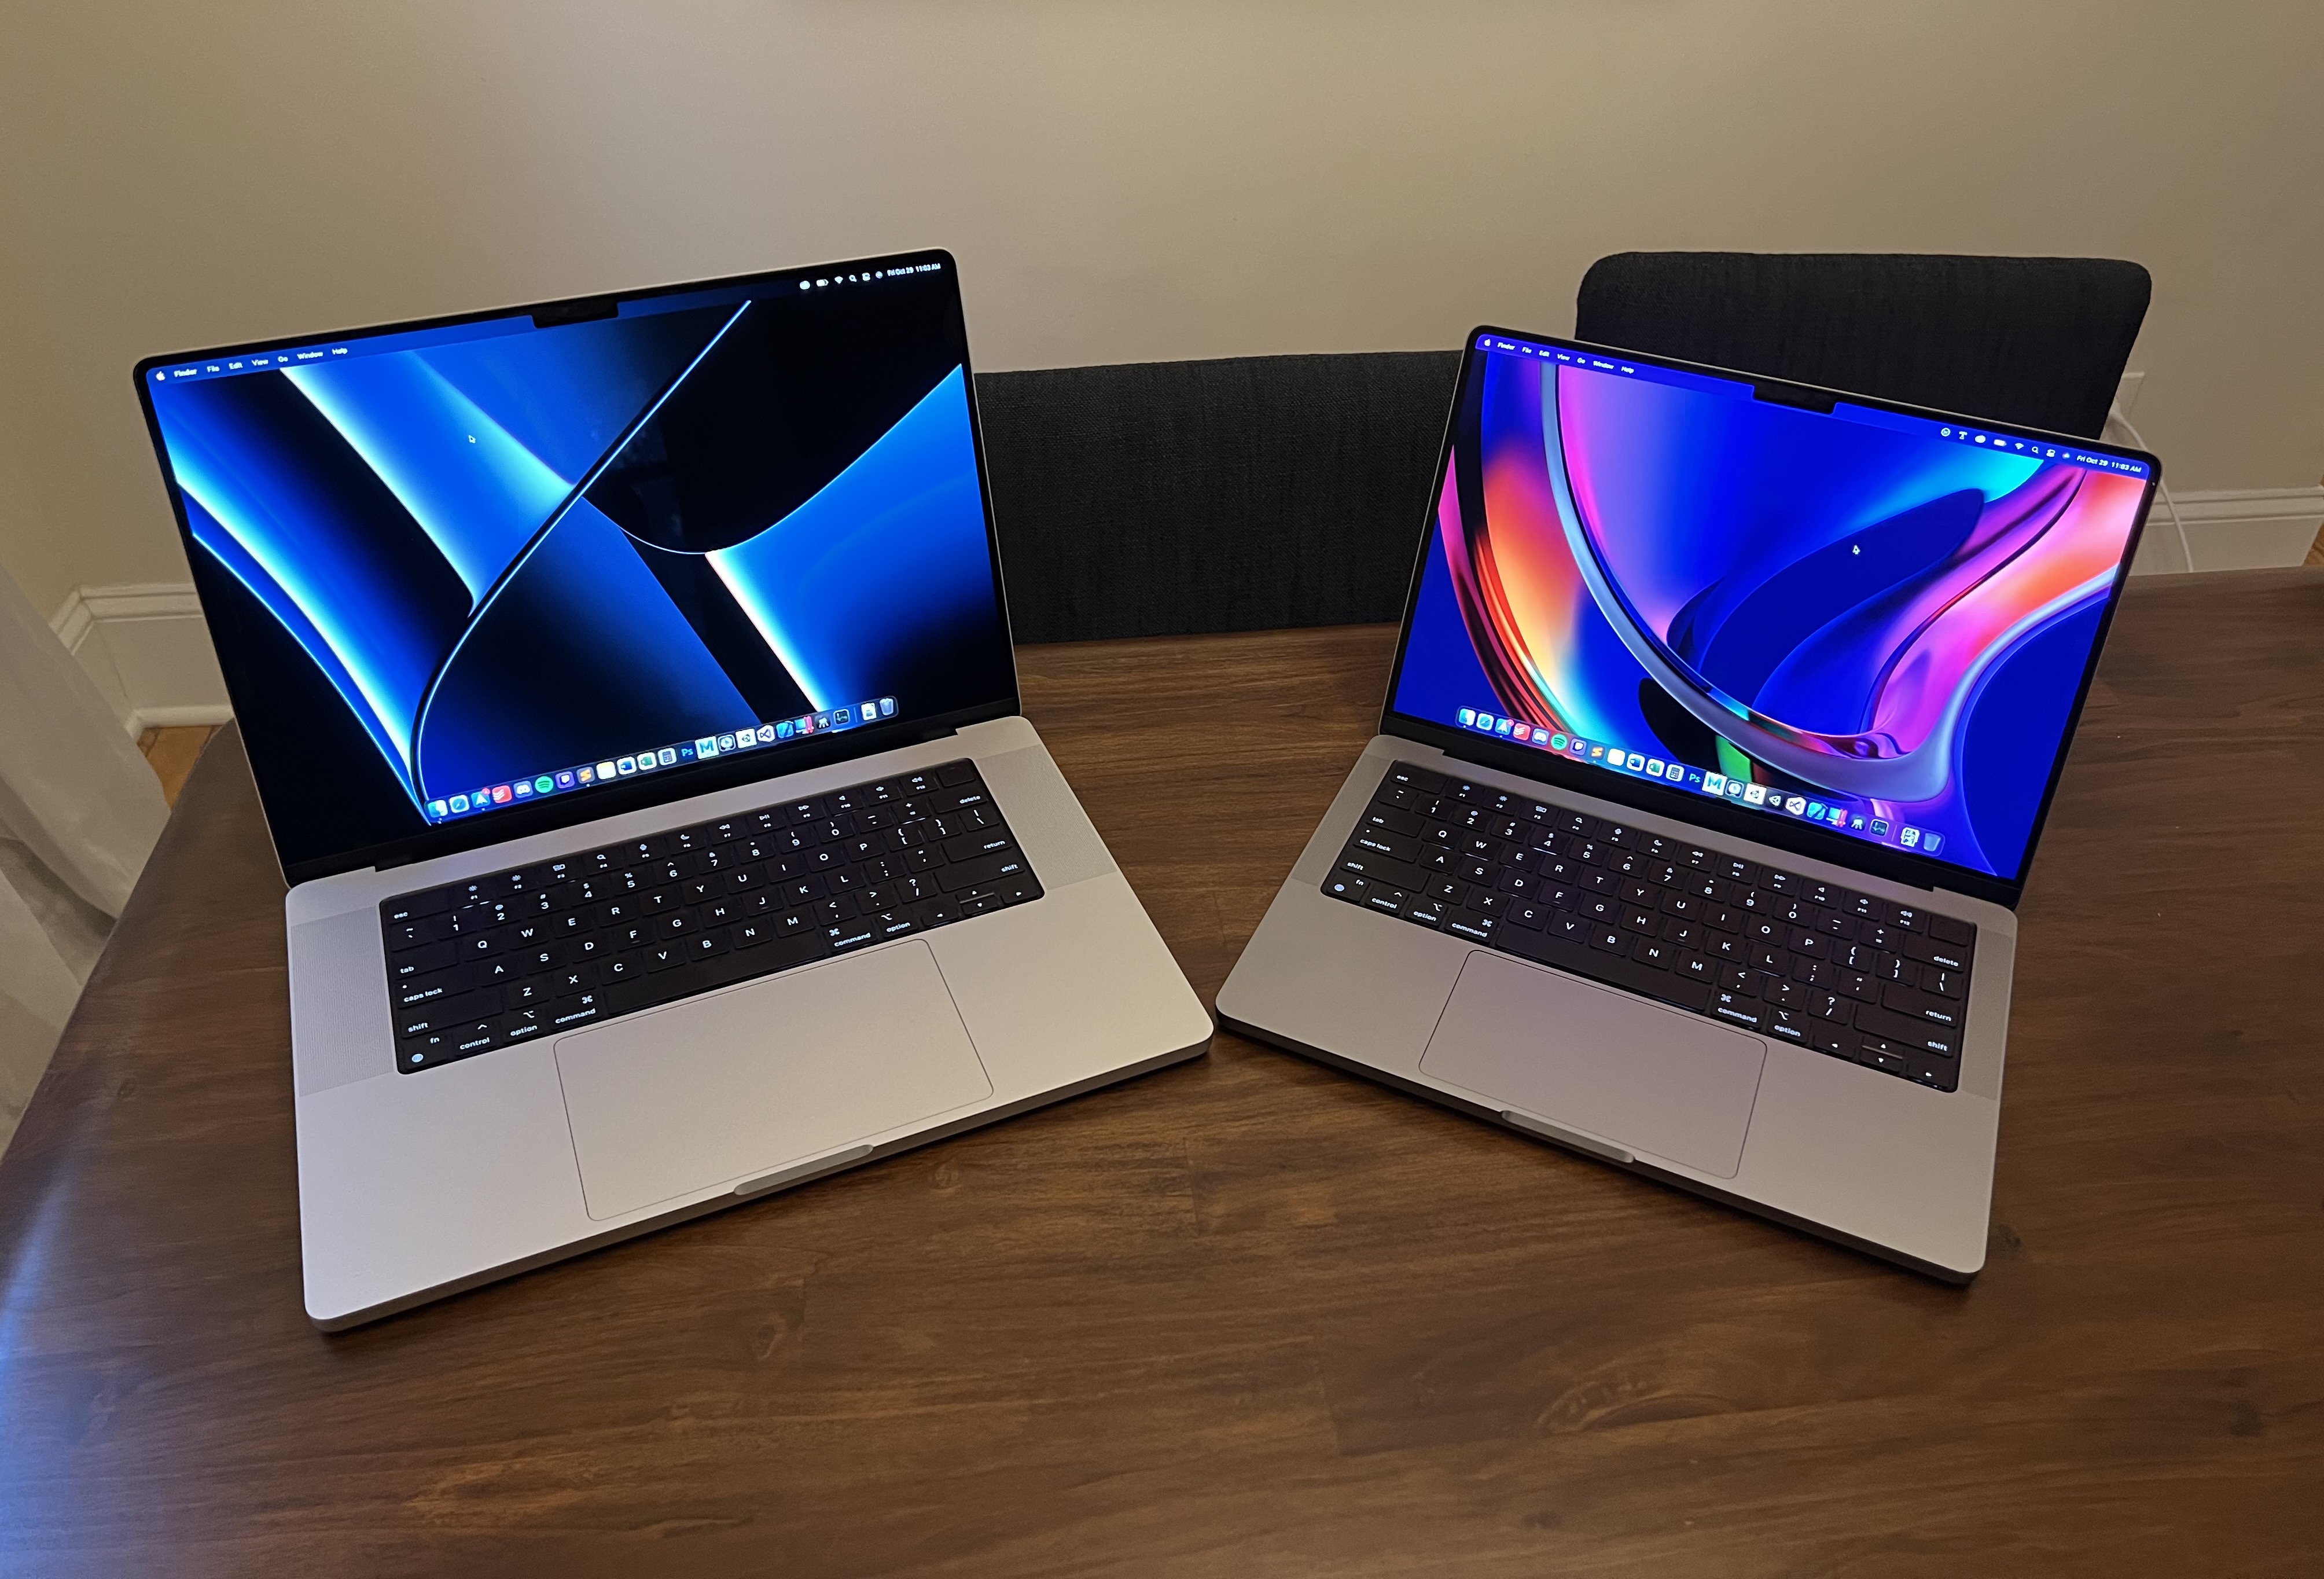 Apple MacBook Pro review (13-inch, 2016): This is basically the